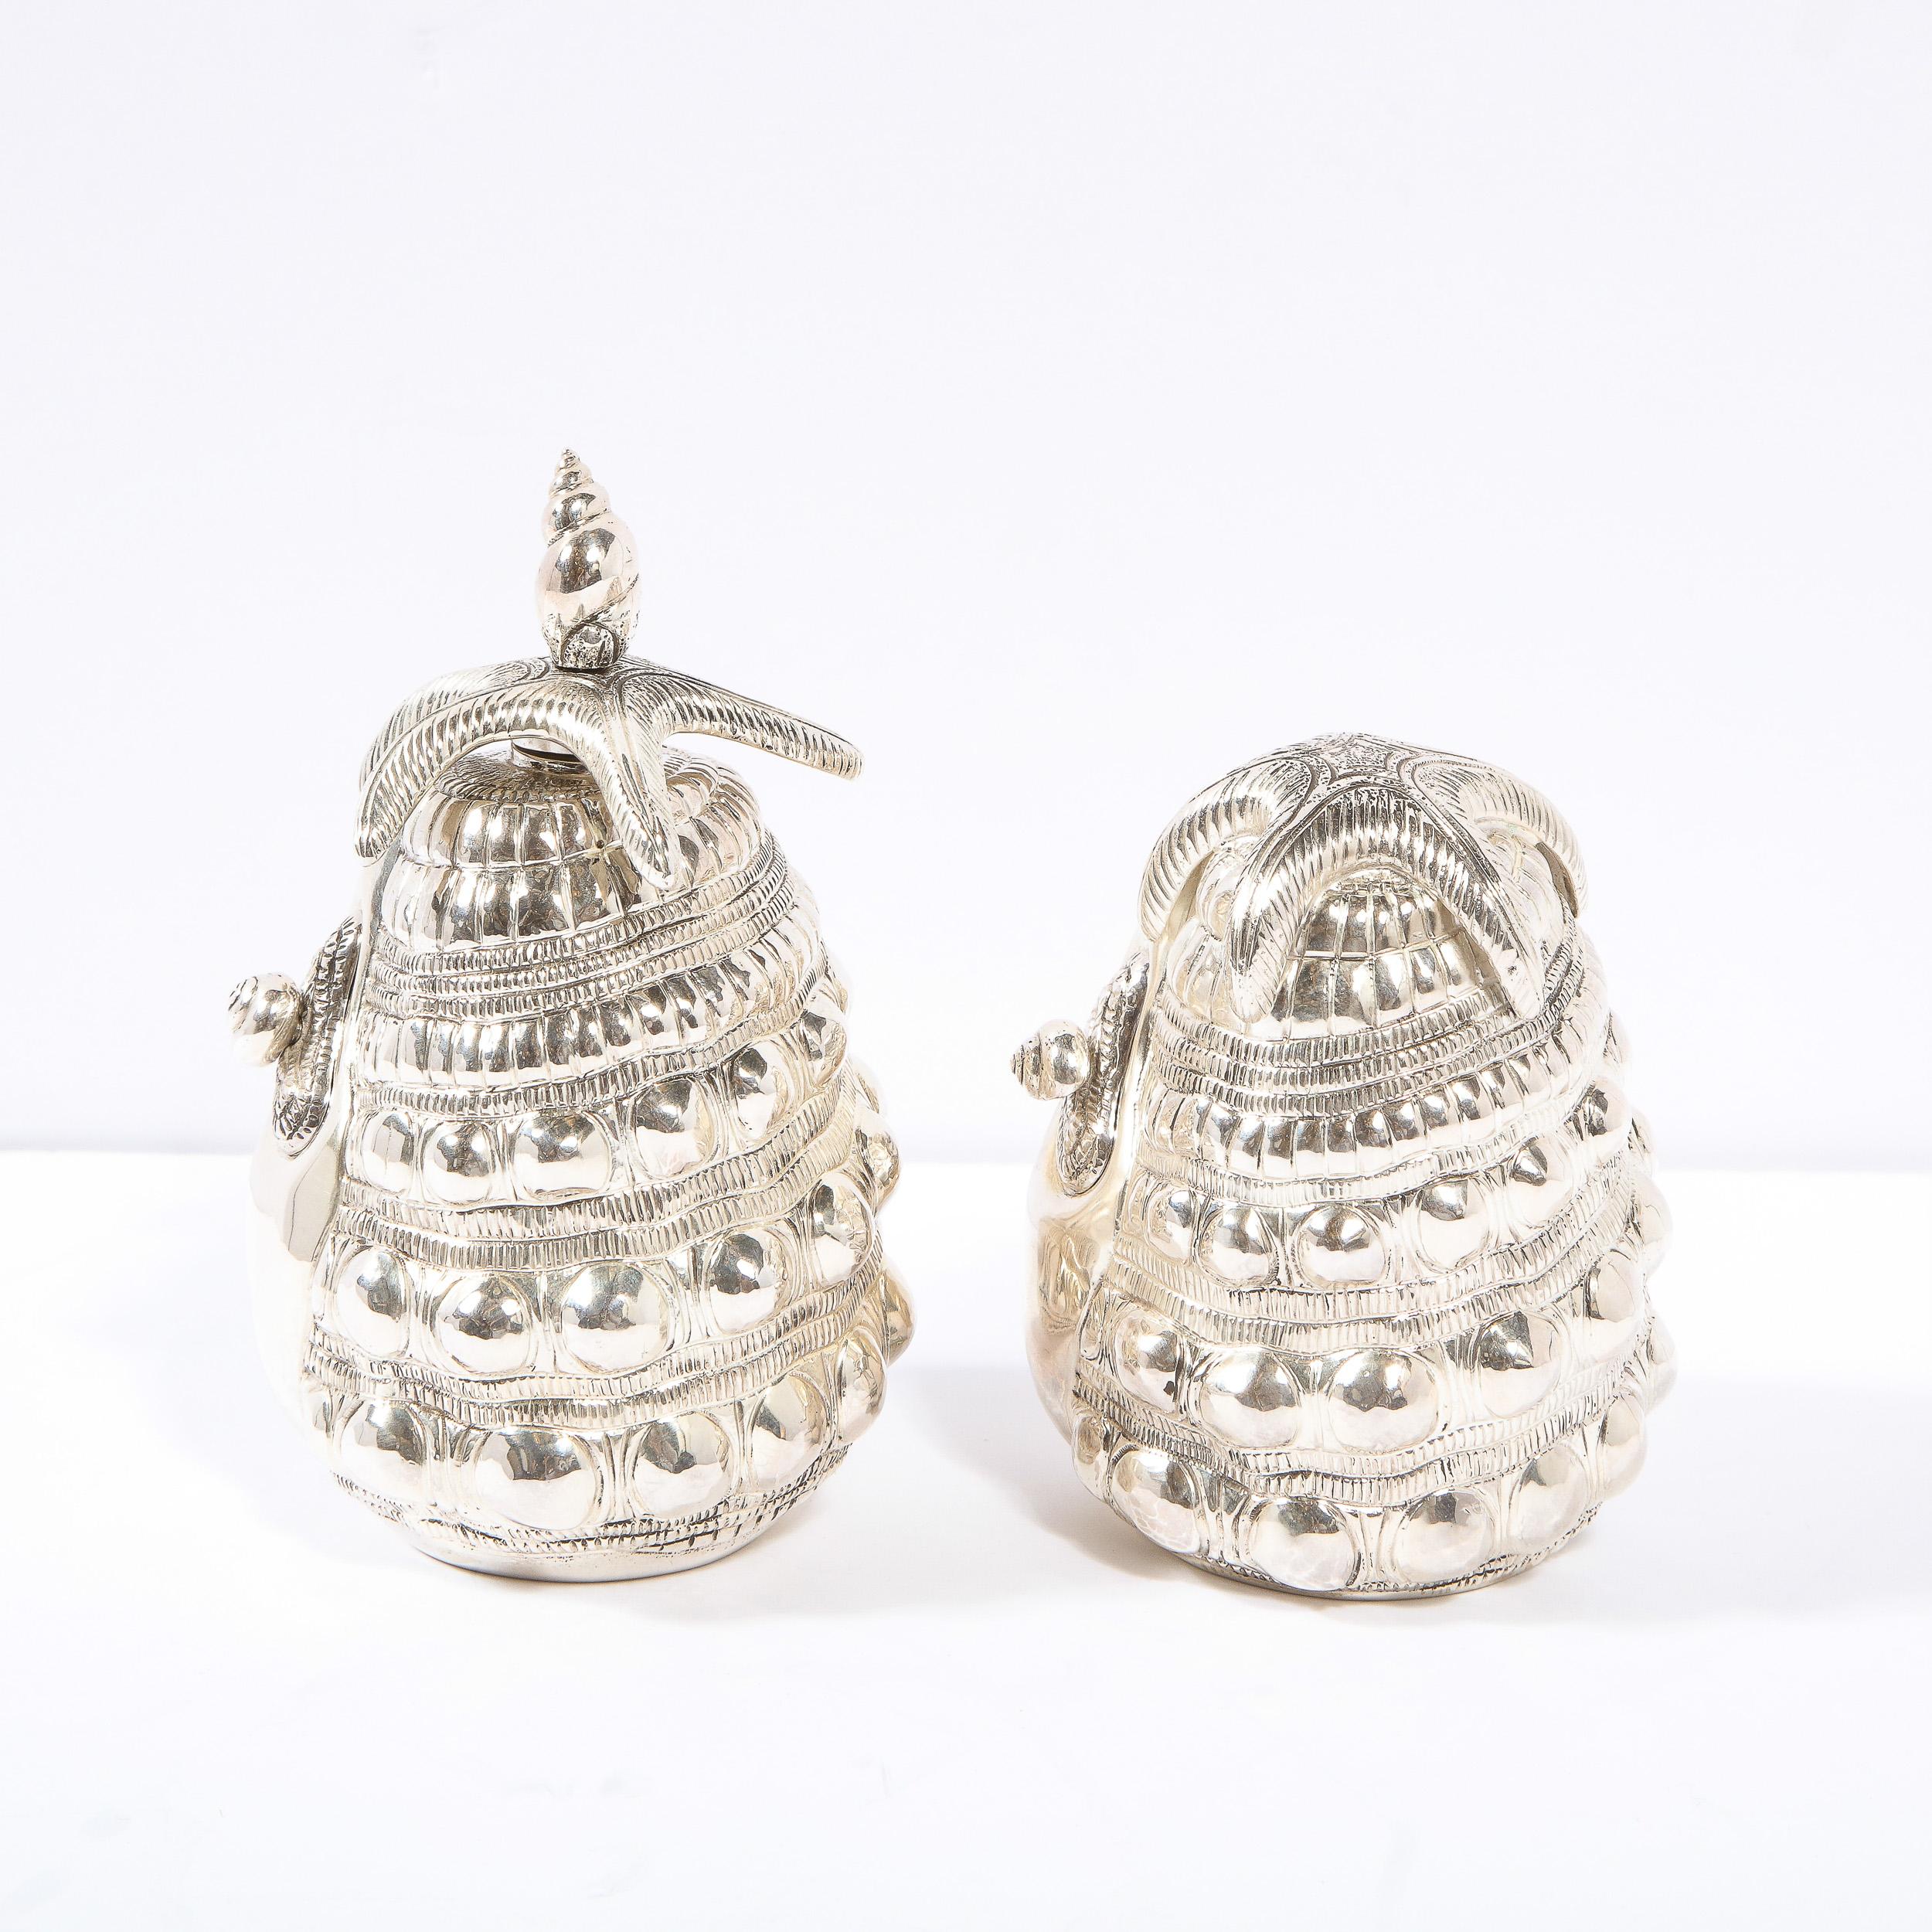 Established in Venice in 1846, Missiaglia is one of the world's premier makers of the finest jewelry objects, as well as a select number of bespoke sterling silver tabletop accessories. This handcrafted stylized conch shell shaker and pepper mill